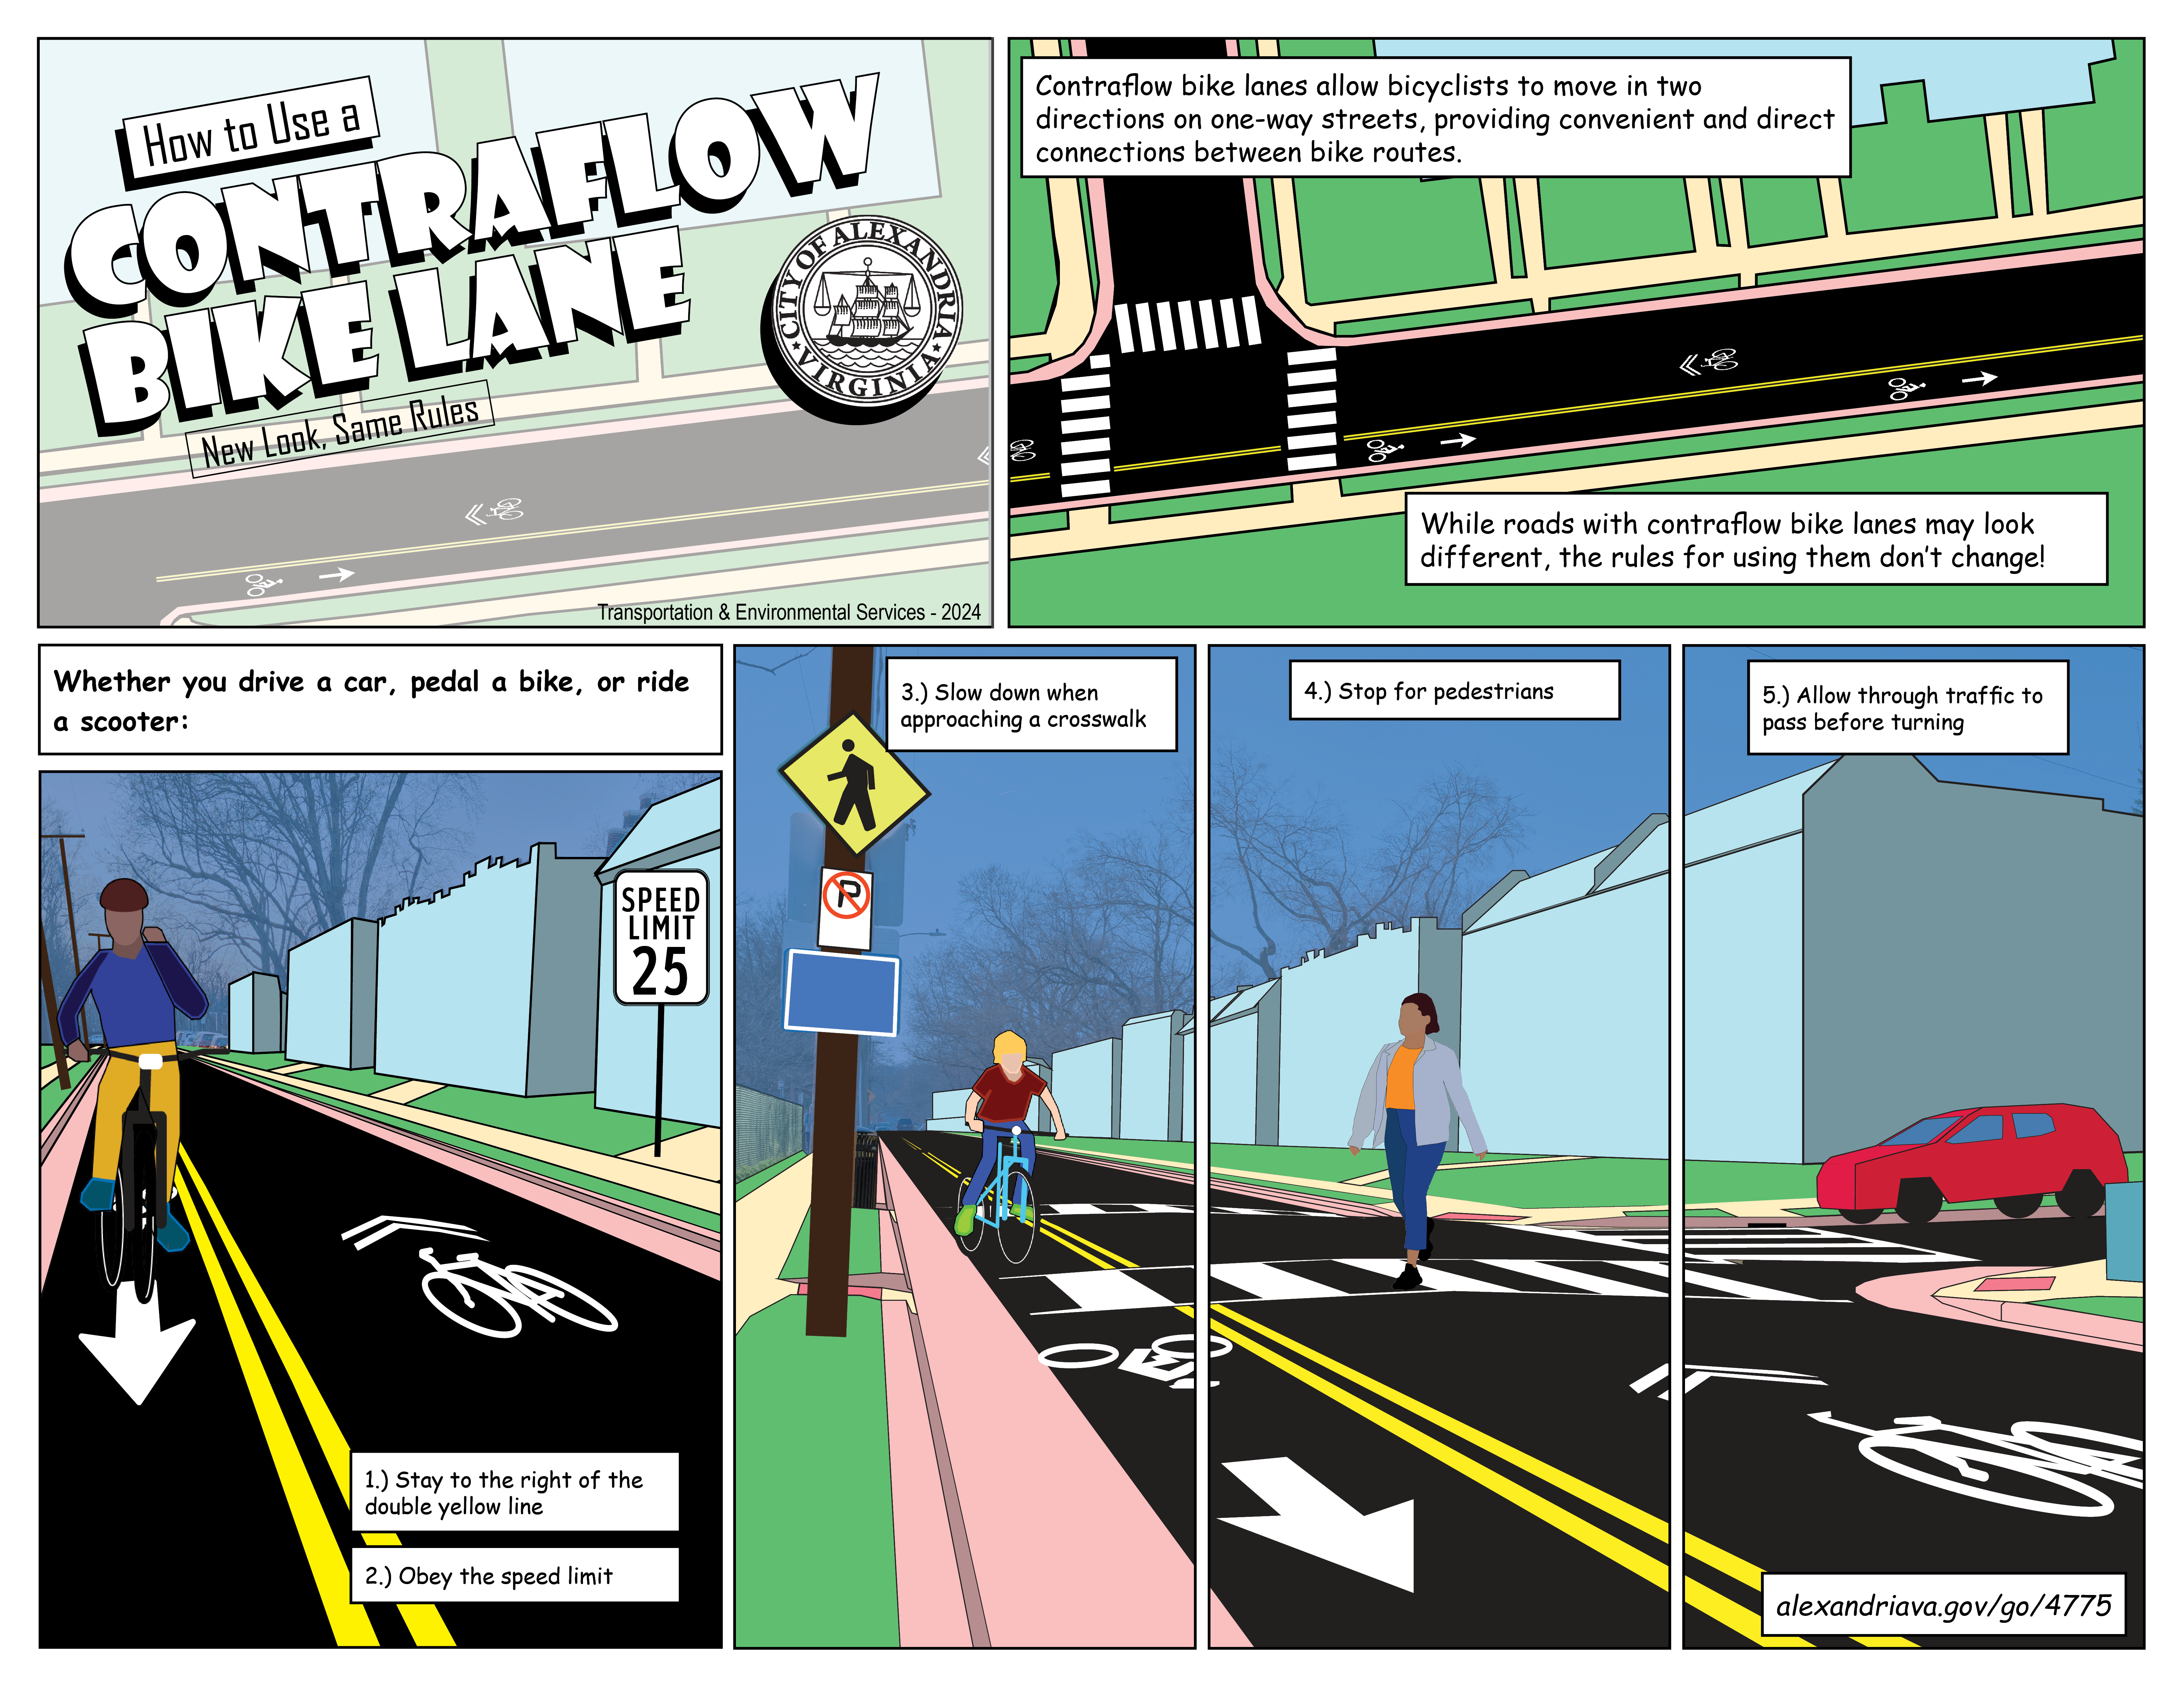 An informational graphic that looks like a comic book showing the steps for properly using a contraflow  bike lane. 